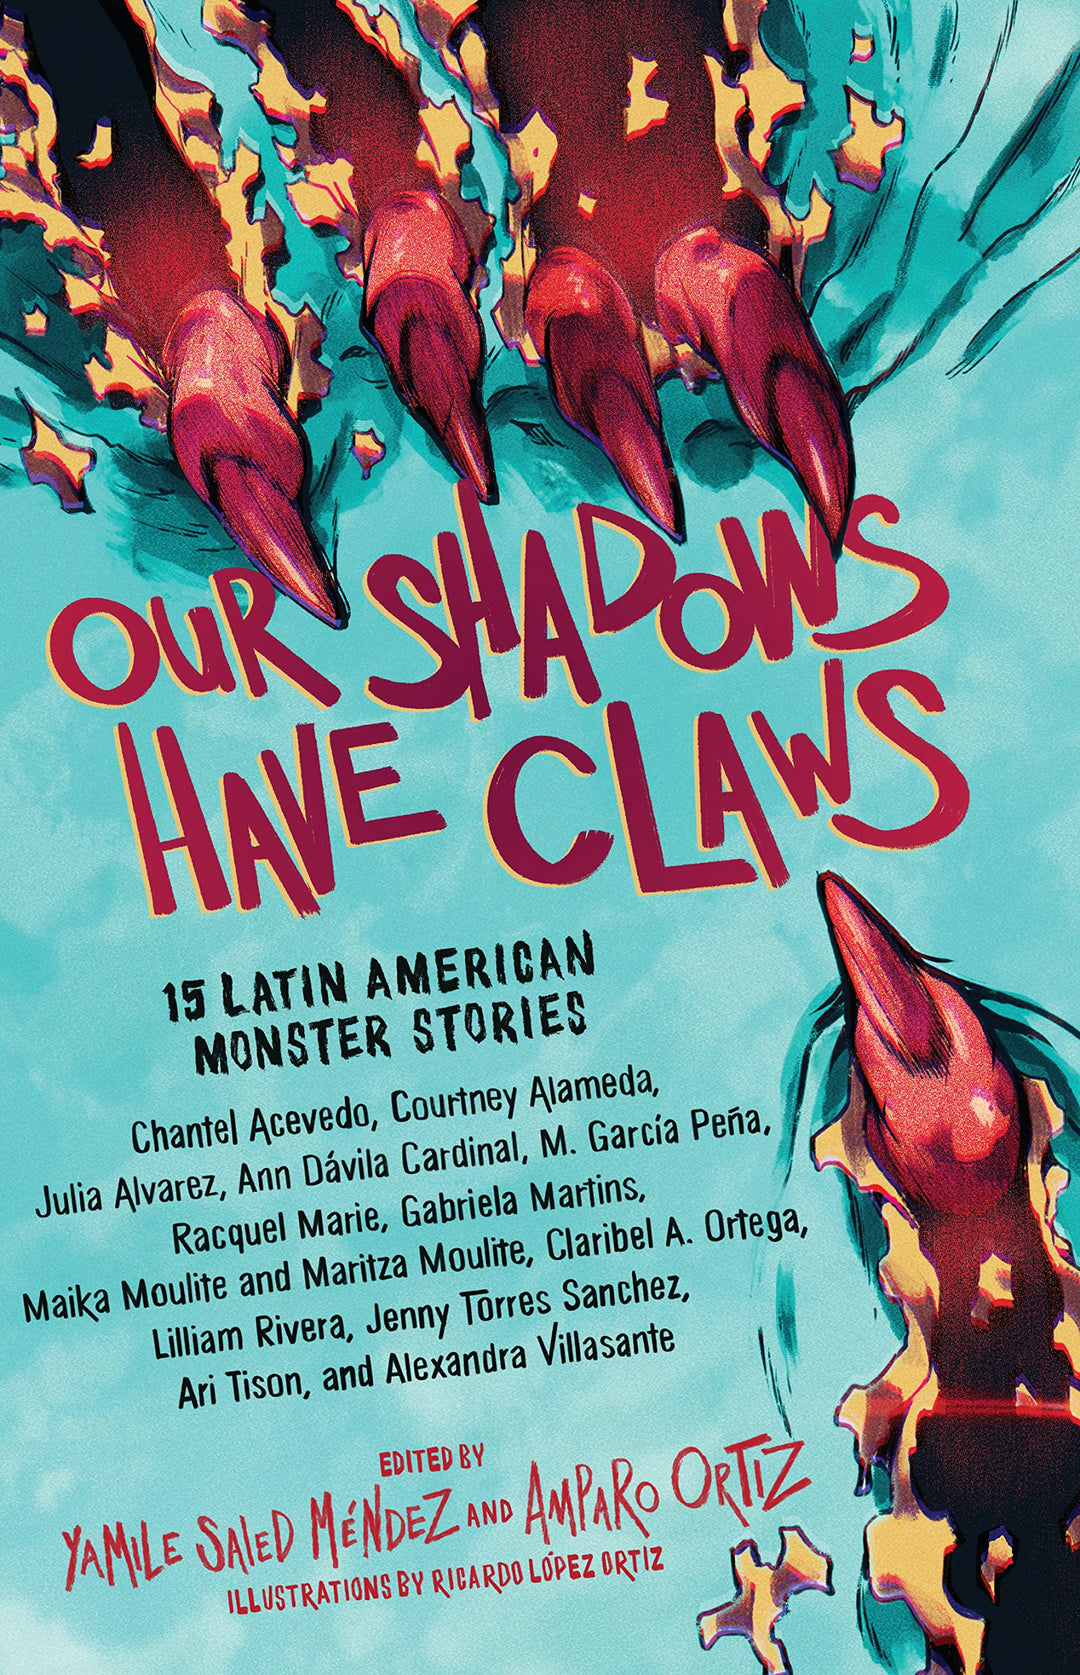 Our Shadows Have Claws edited by Yamile Saied Méndez & Amparo Ortiz